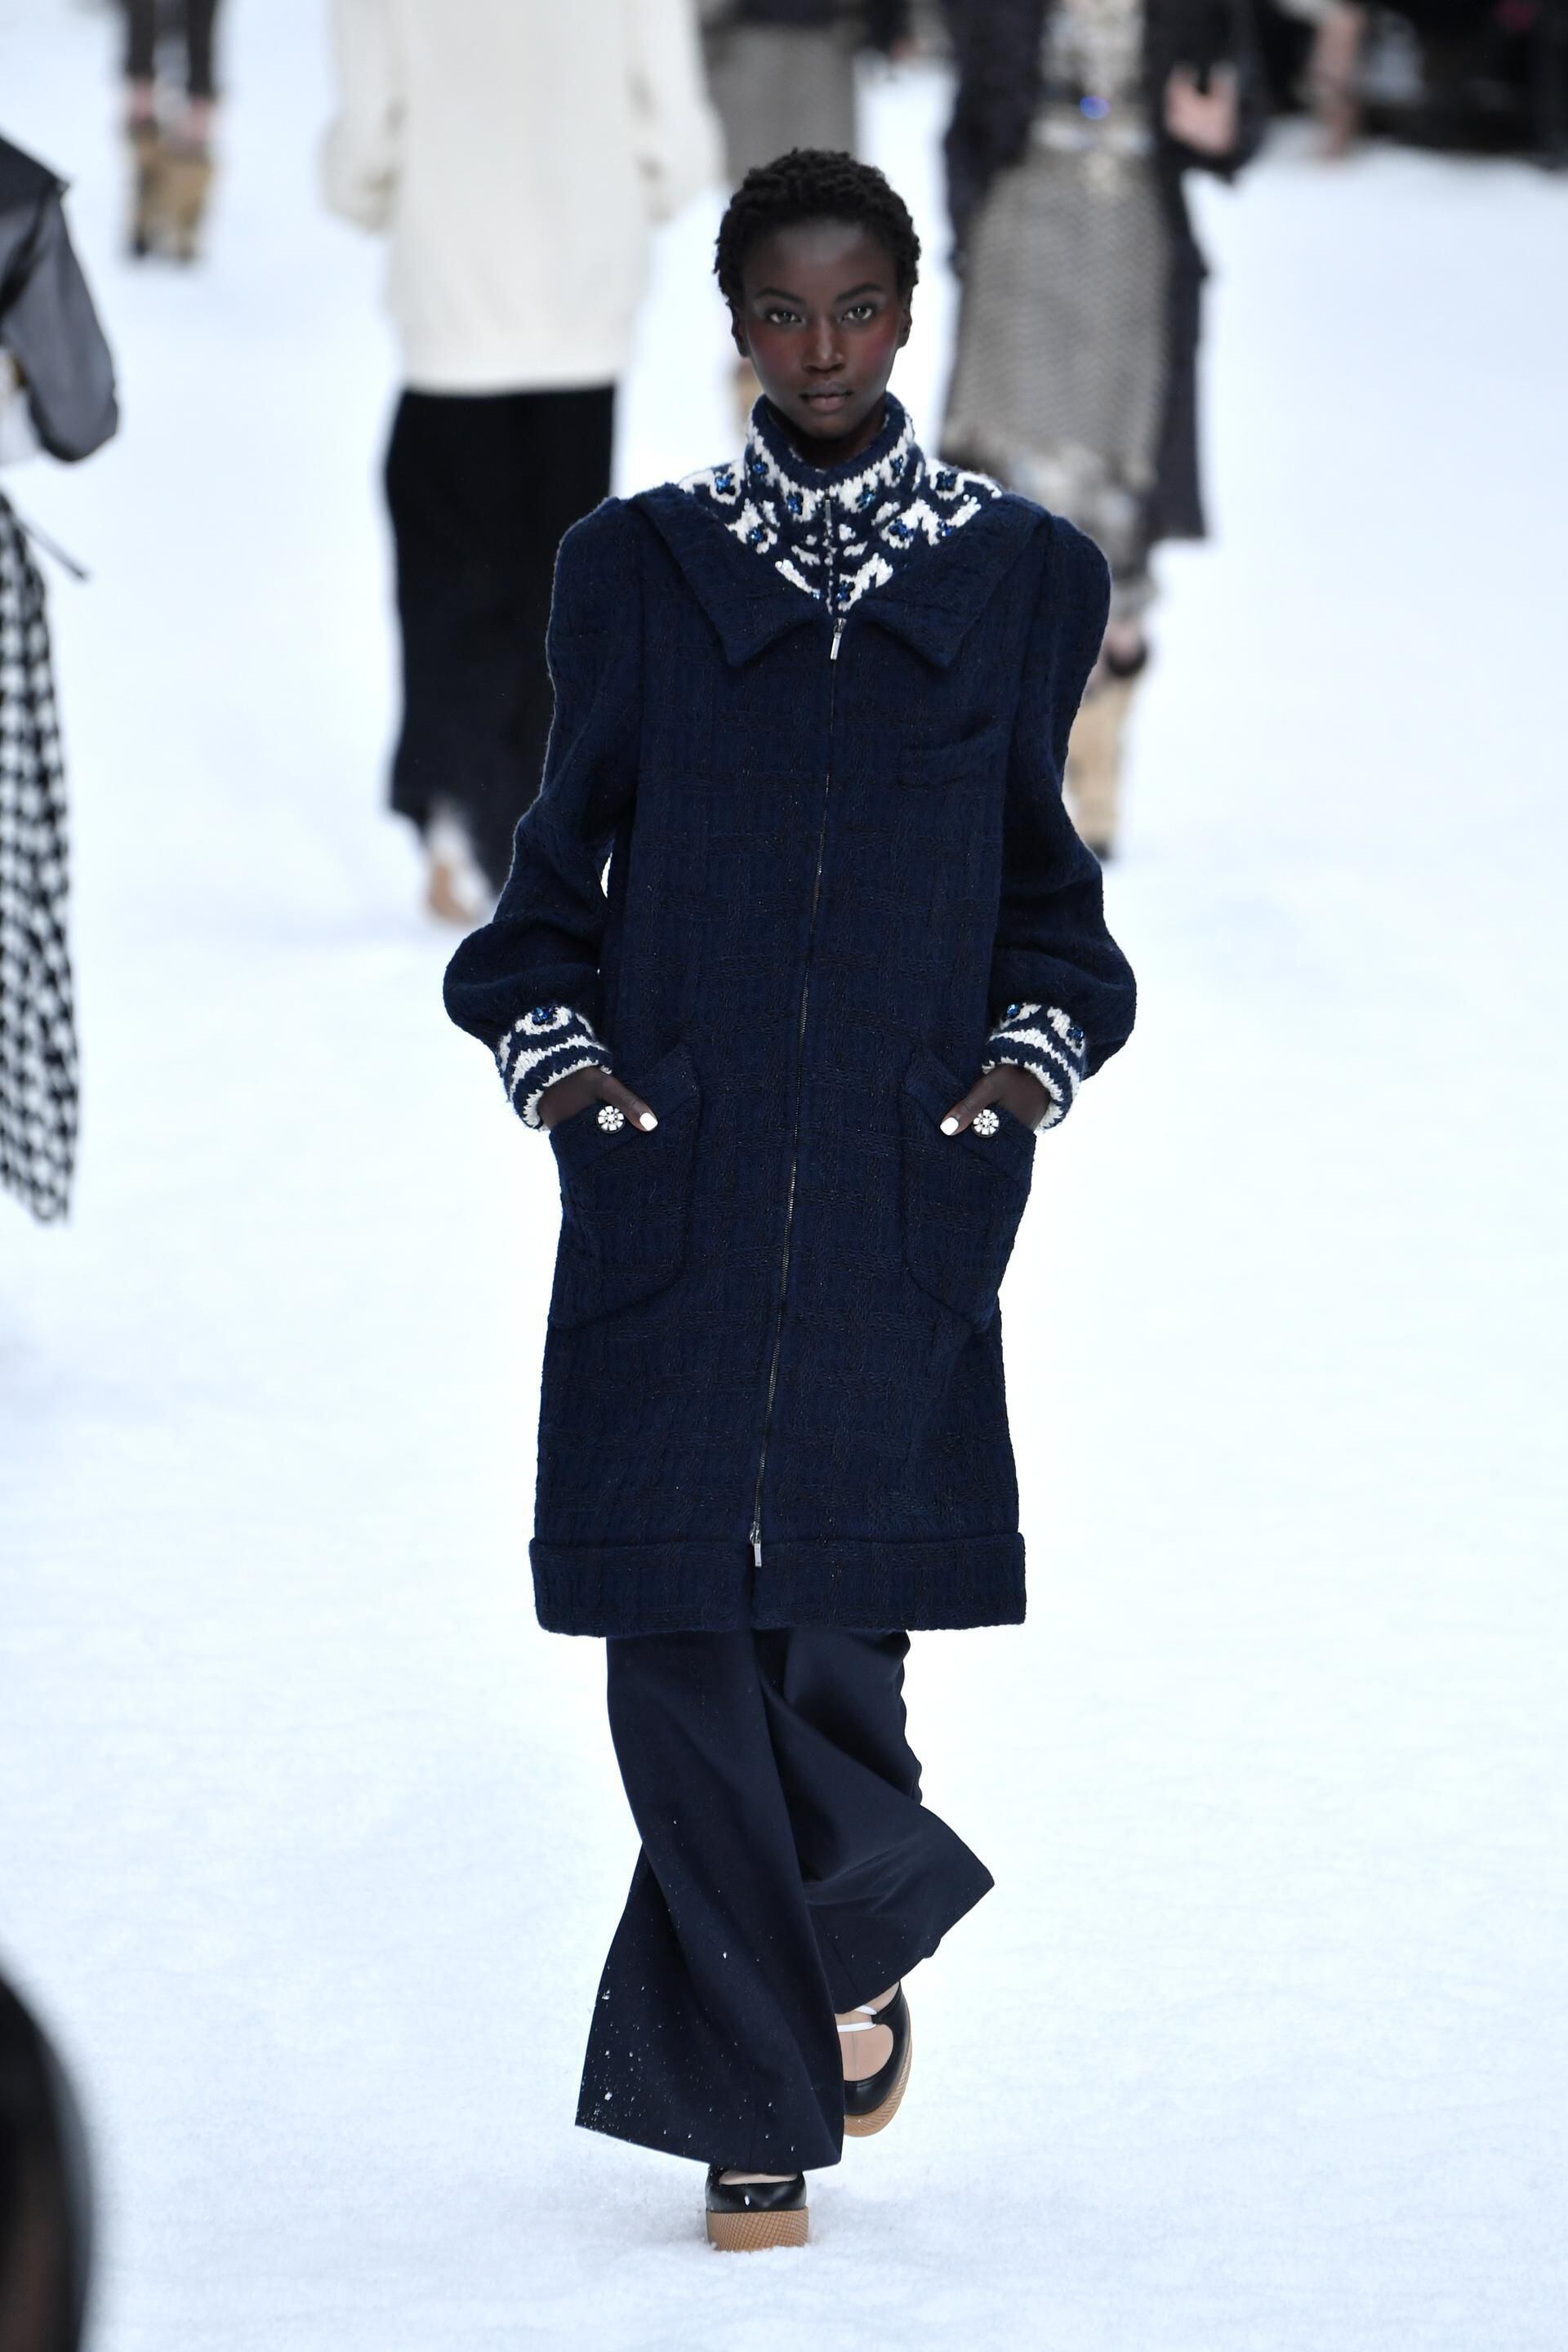 Karl Lagerfeld's final collection for Chanel was a bittersweet